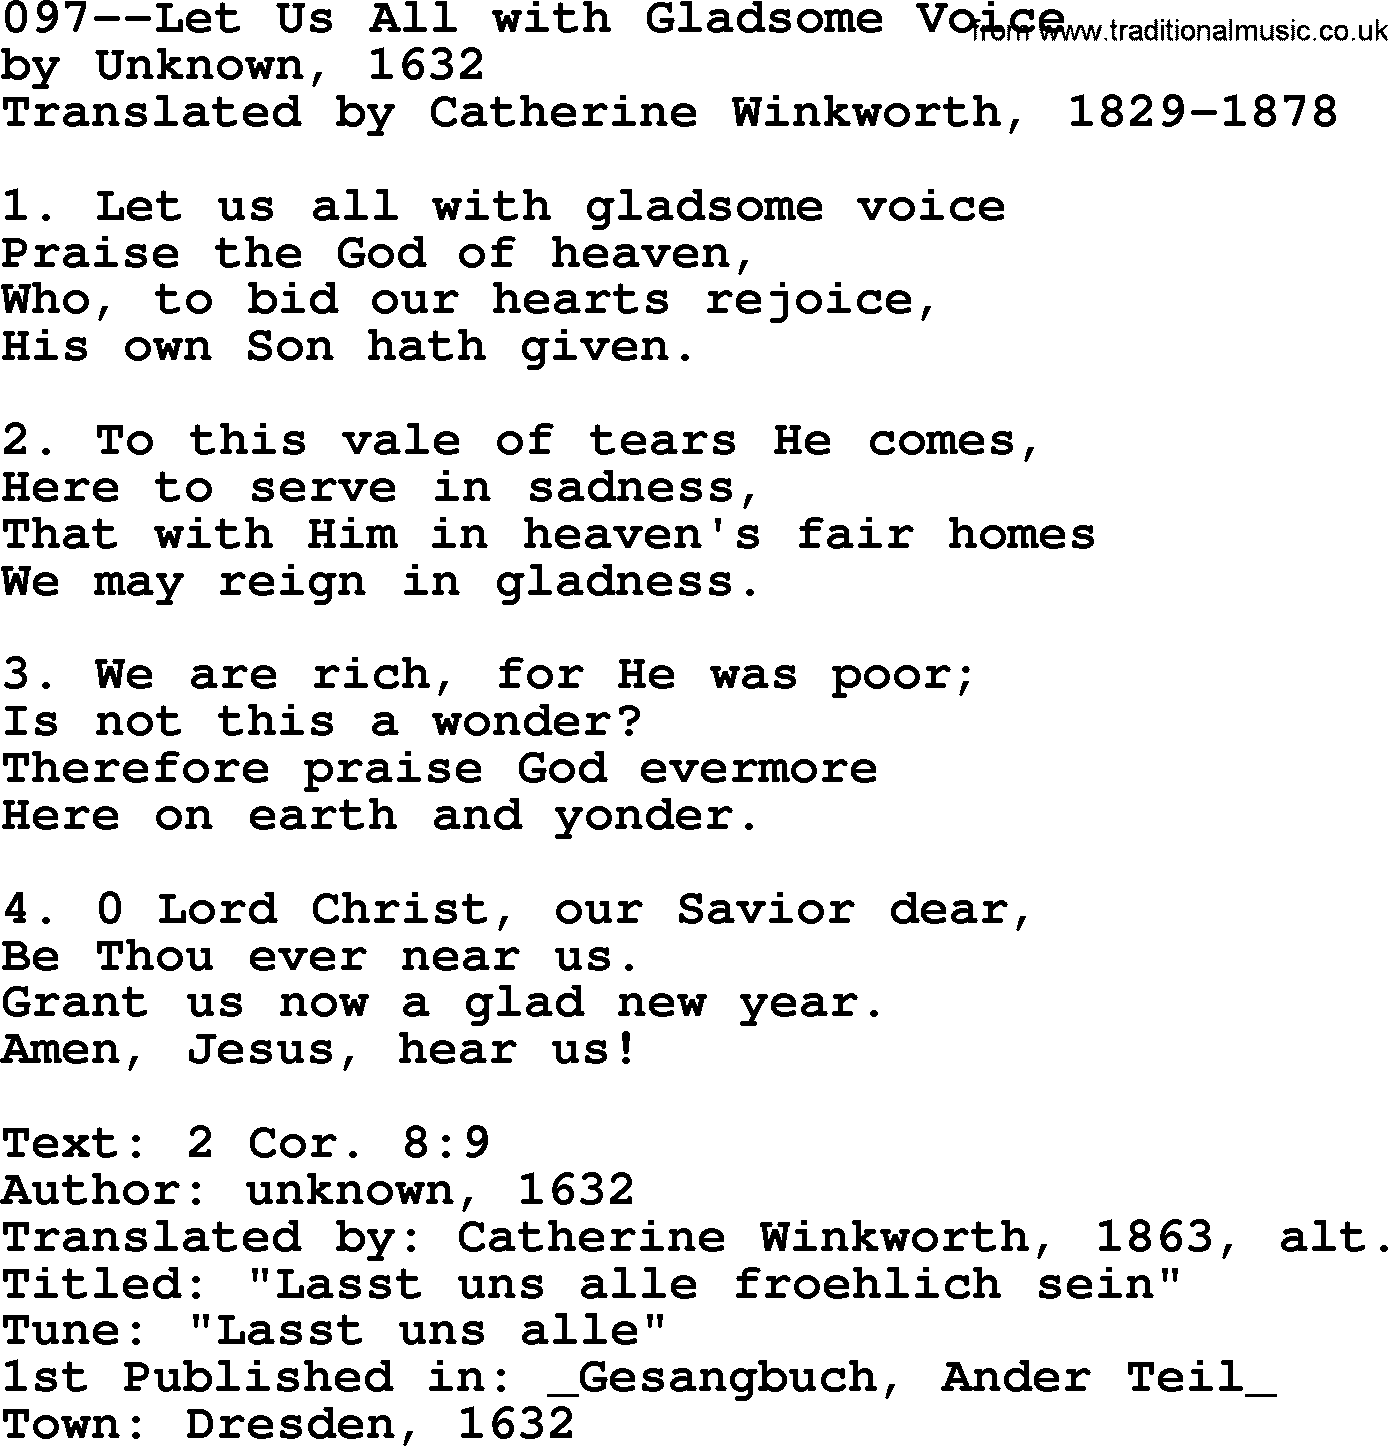 Lutheran Hymn: 097--Let Us All with Gladsome Voice.txt lyrics with PDF